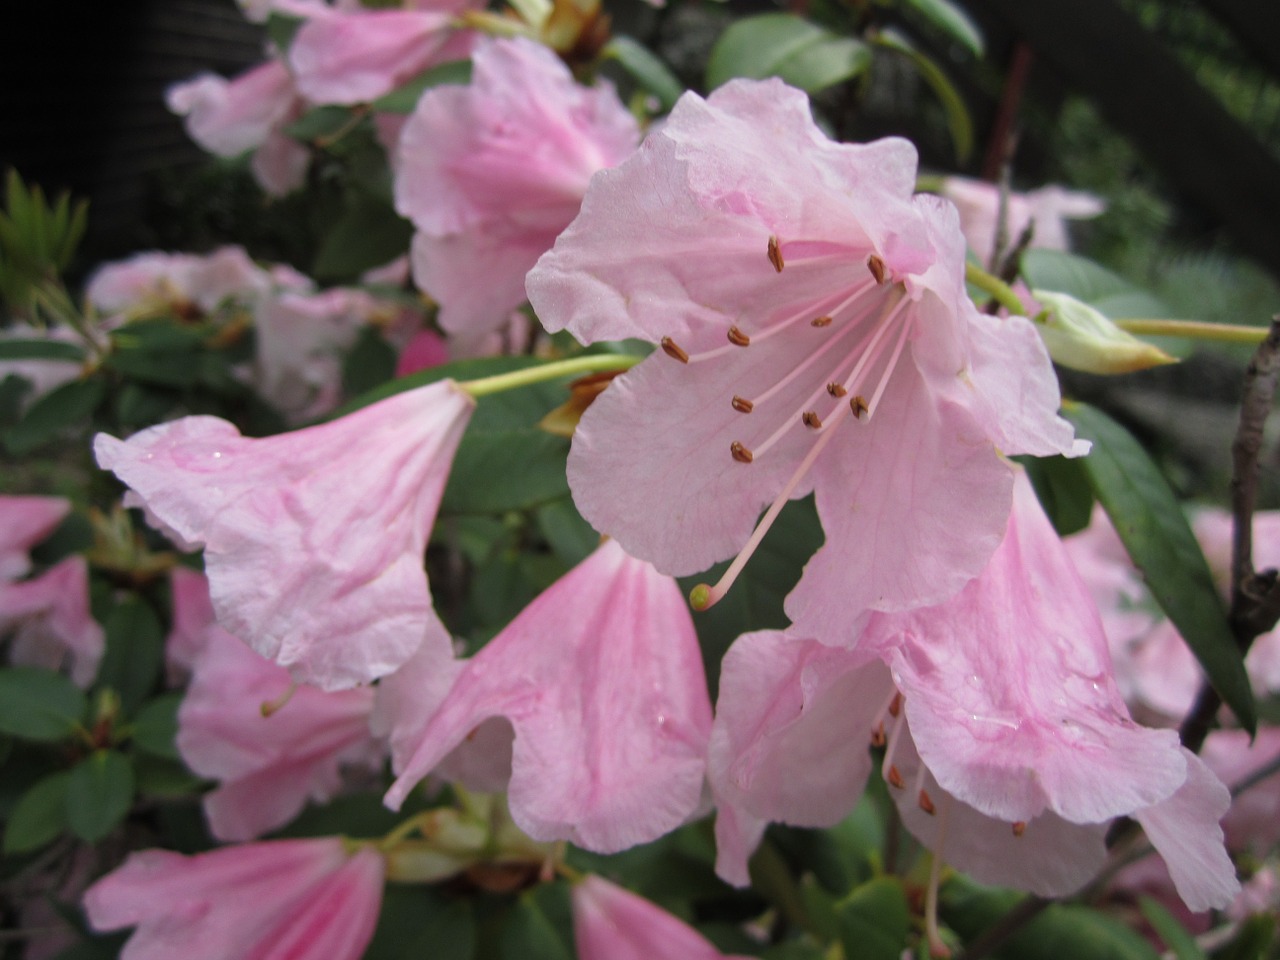 rhododendron plant blossom free photo